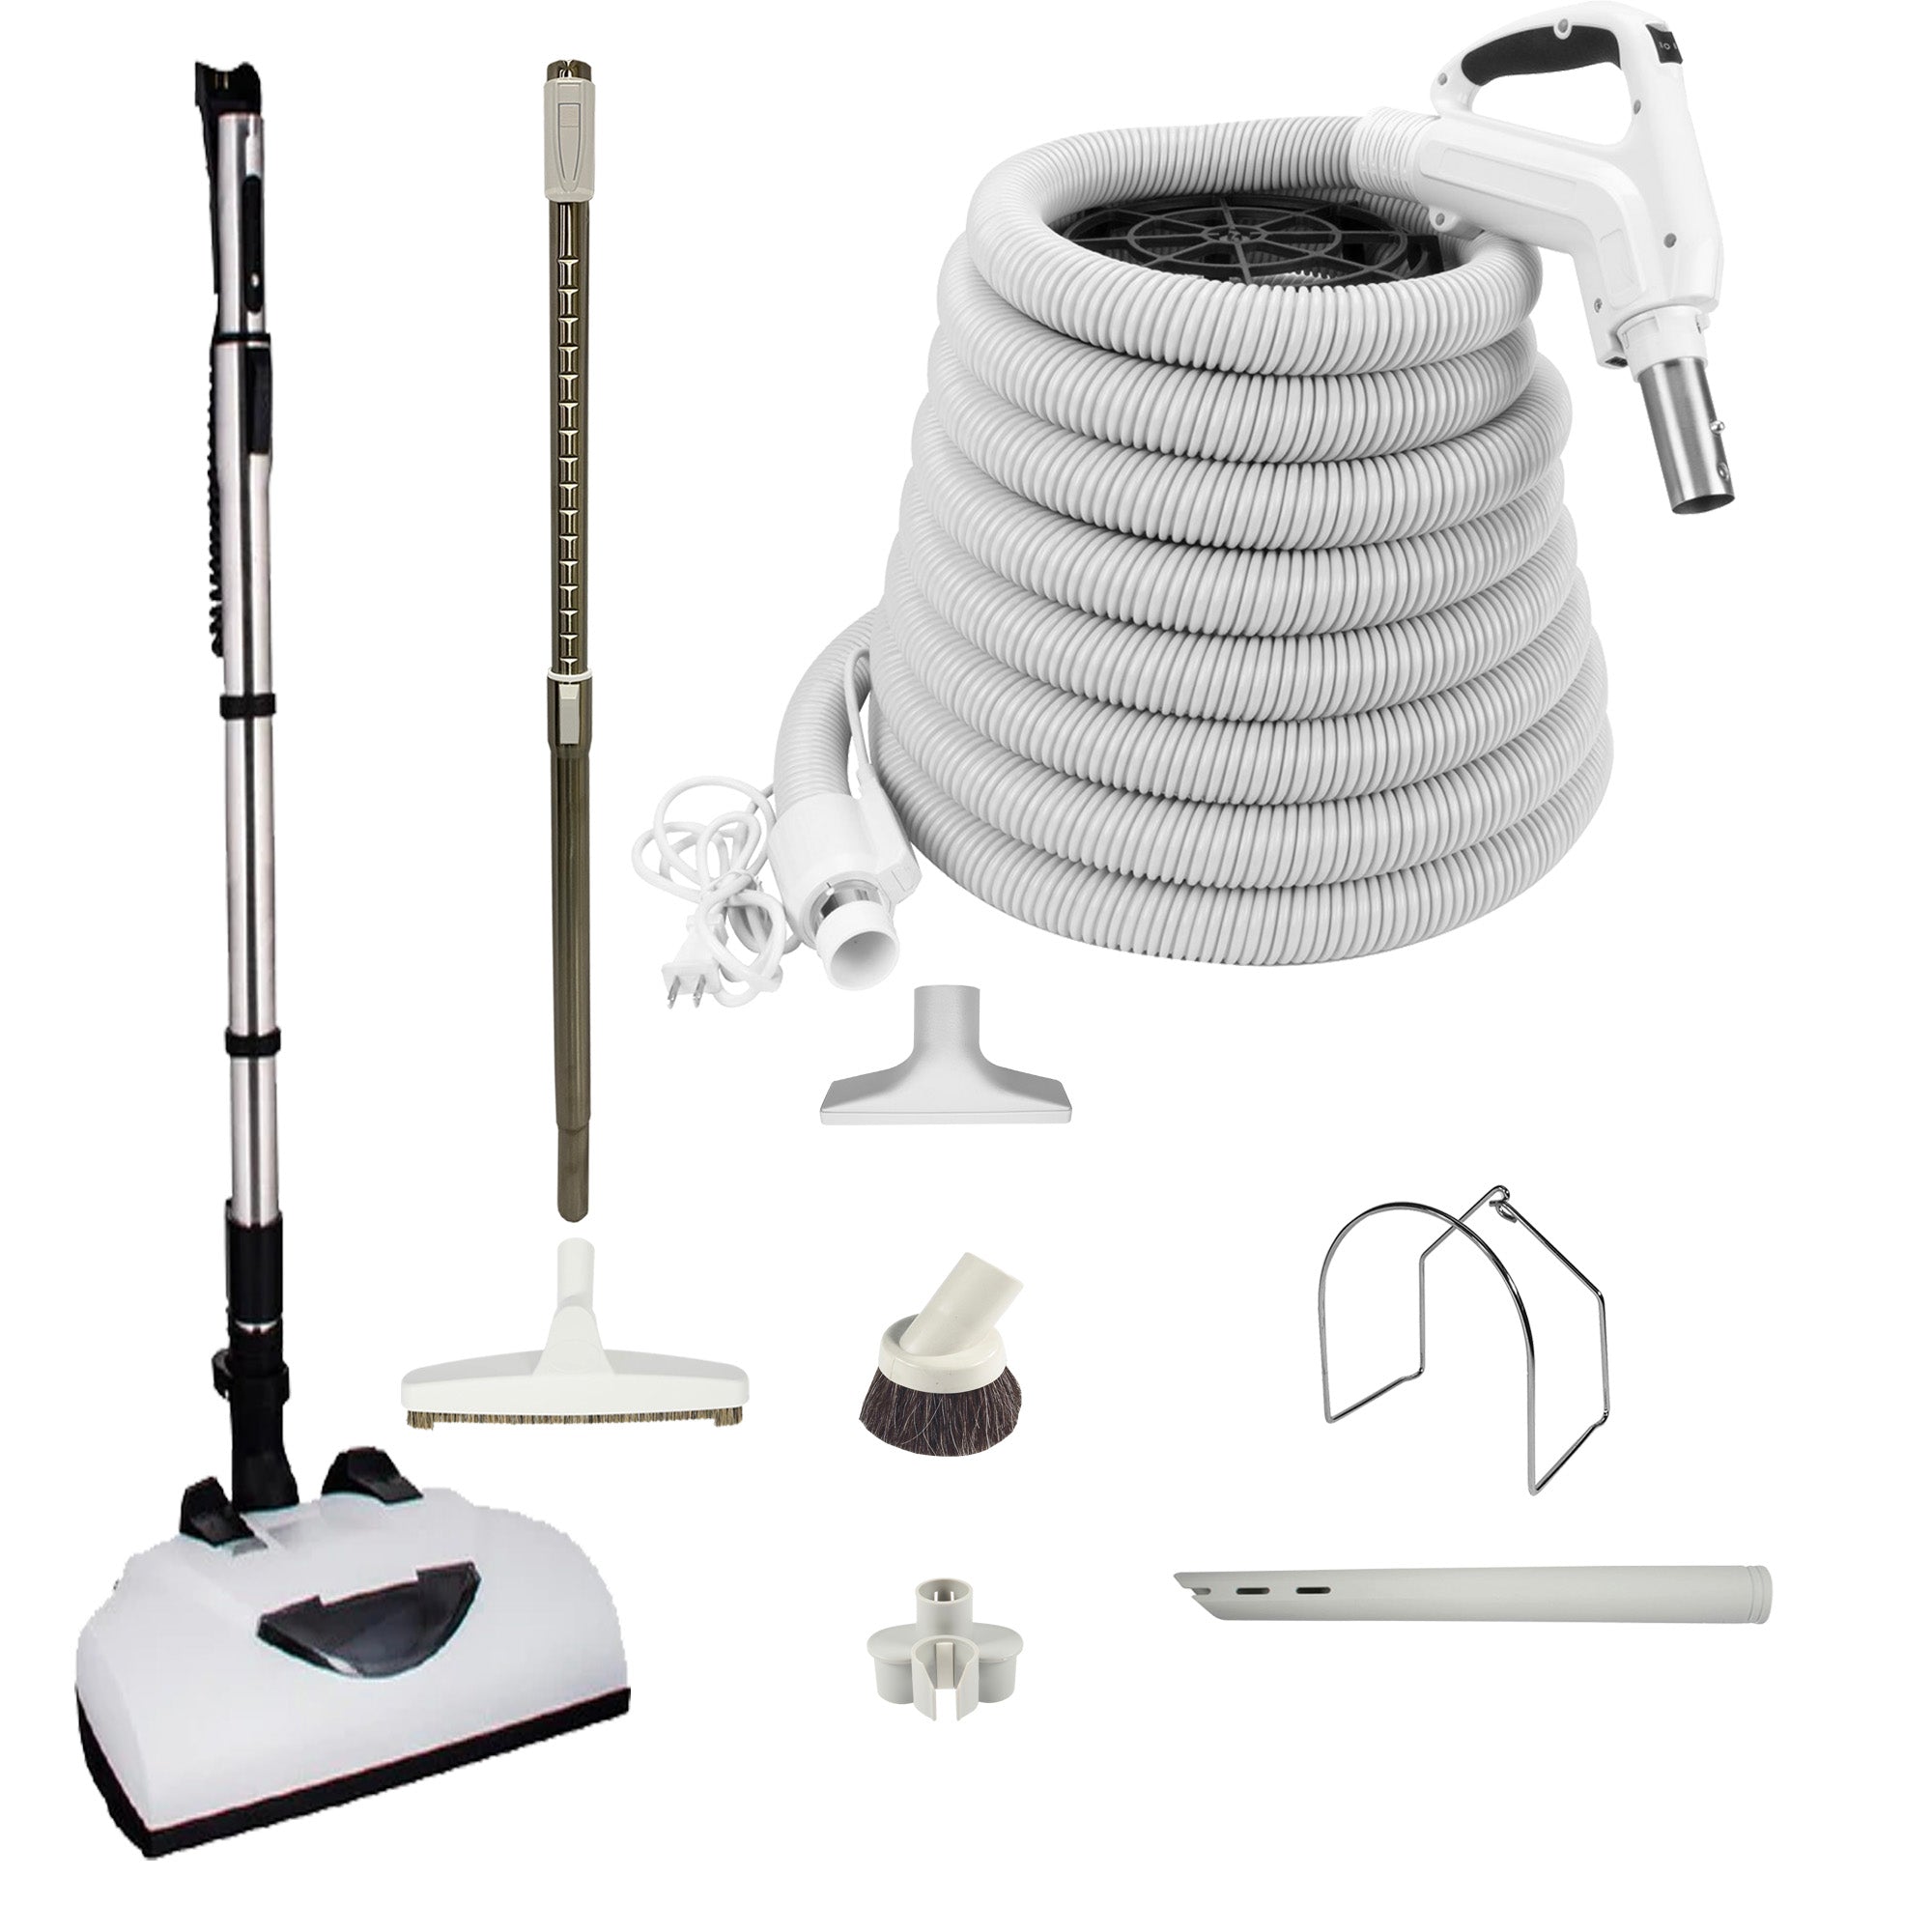 Wessel Werk Central Vacuum Accessory Kit with Telescopic Wand and Deluxe Tool Set - White